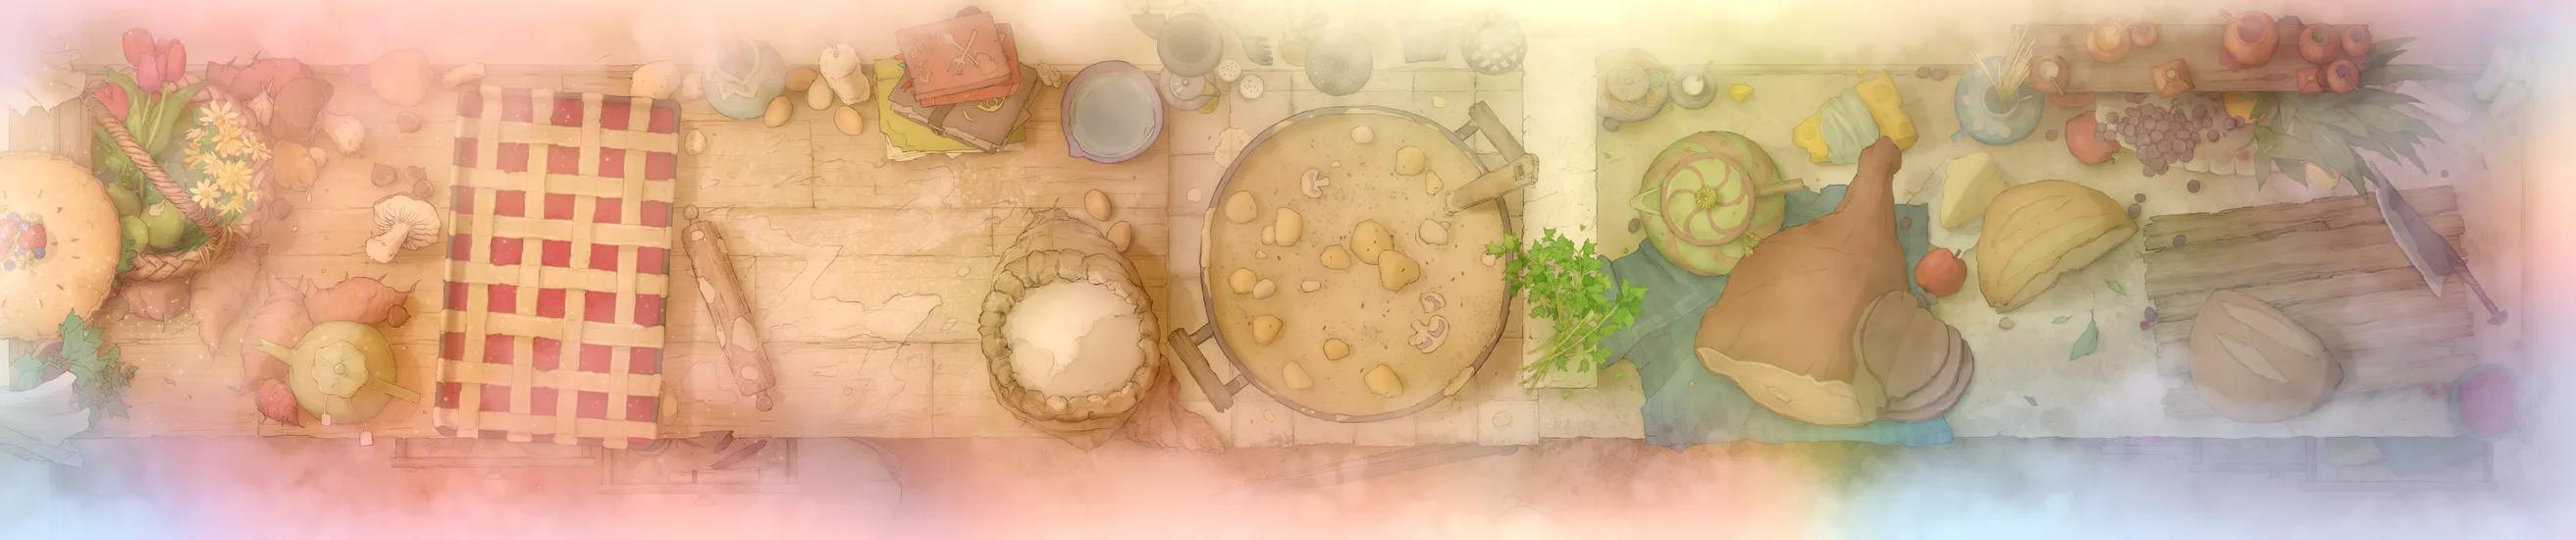 Giant Kitchen map, Dream Sequence variant